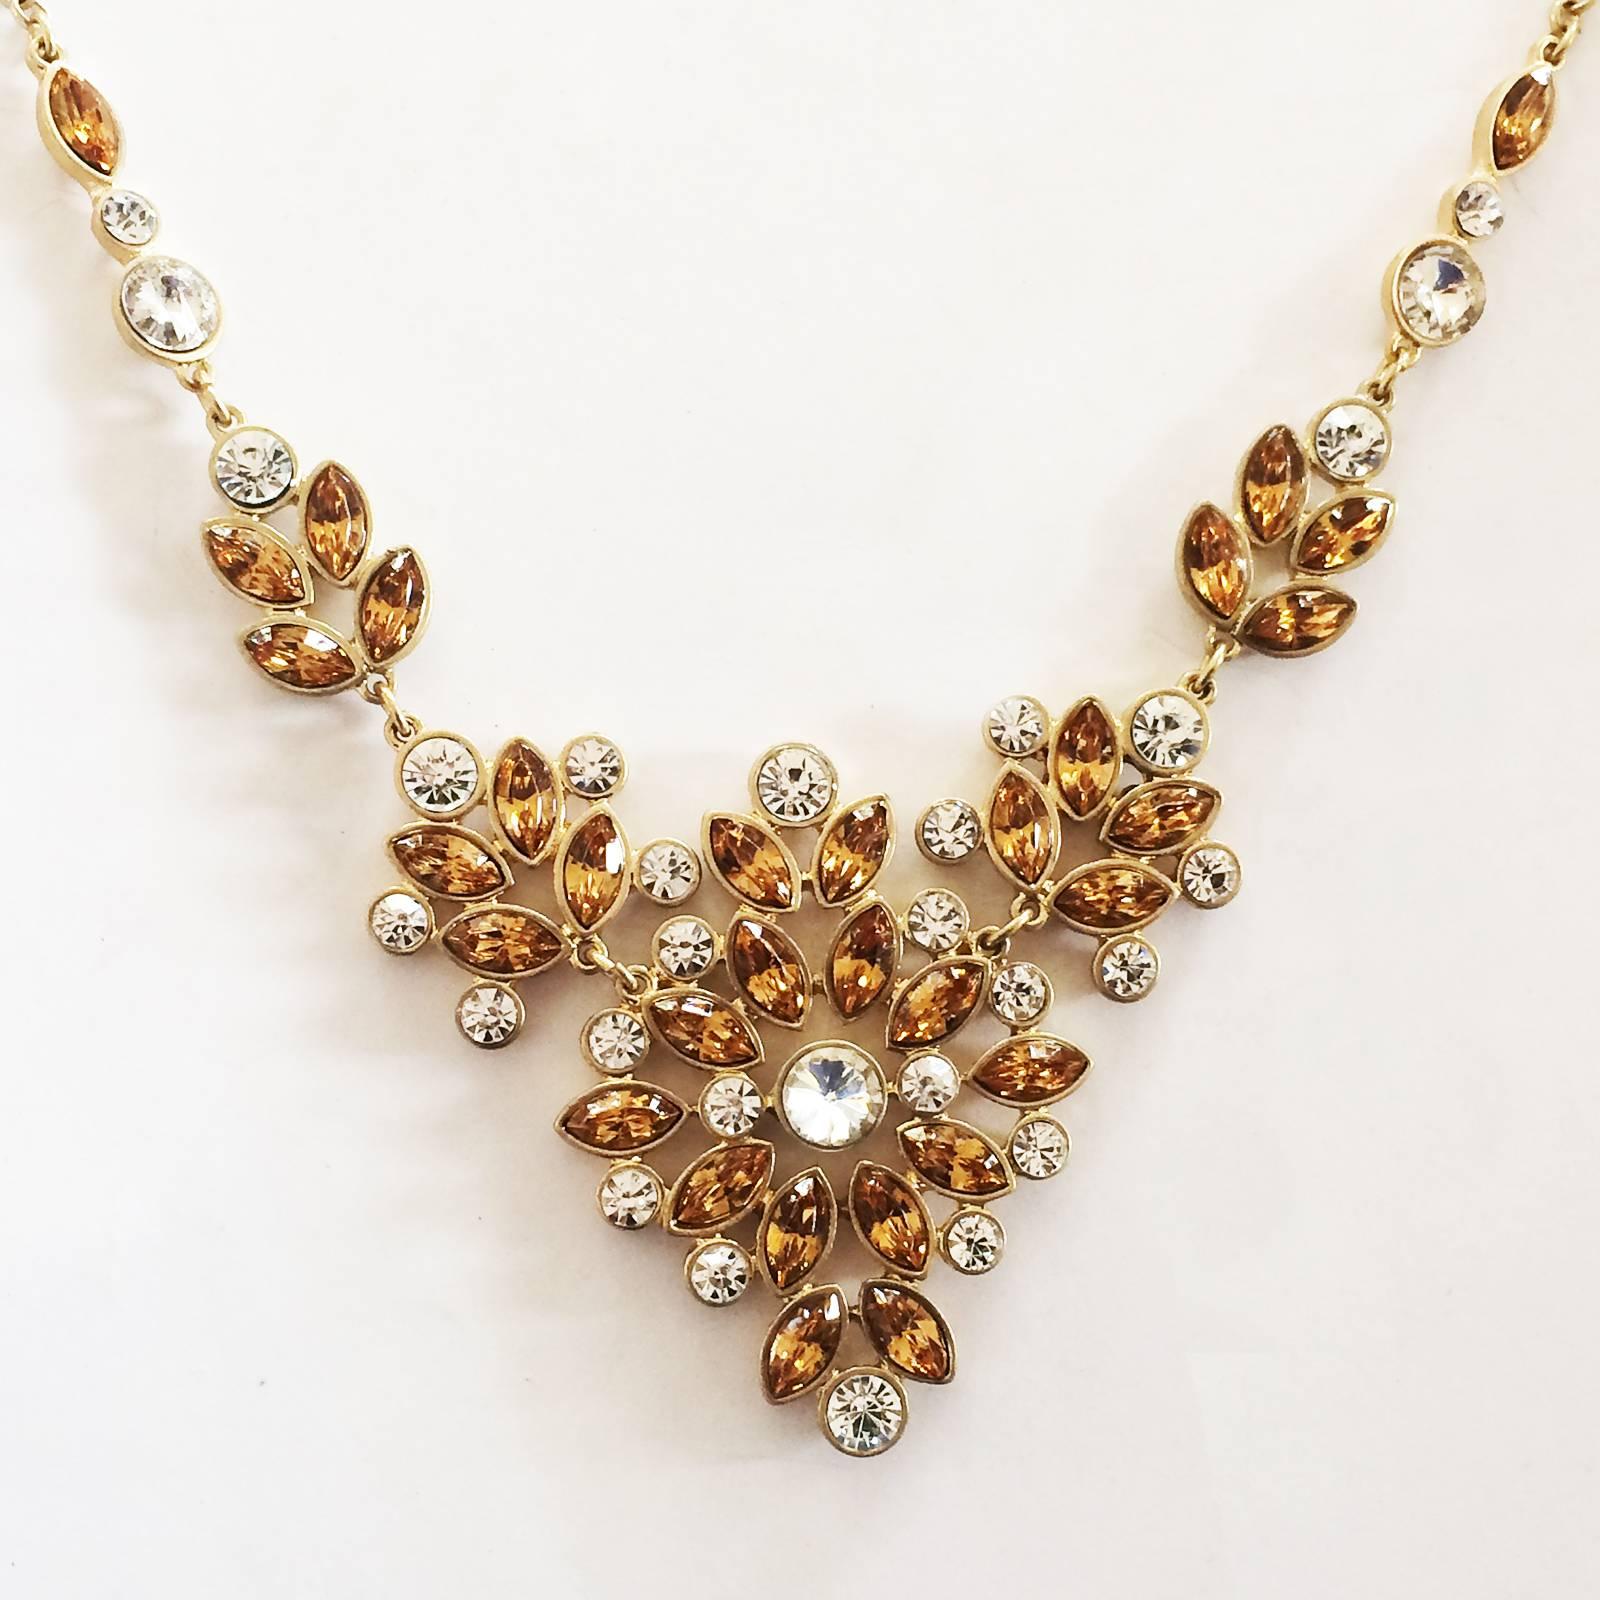 An outstanding, Oscar De La Renta Runway Necklace with heavily facetted Citrene glass and Crystal with an adjustable Gilt Chain. Original gilt Lobster Claw clasp and matching tag, with Oscar de la Renta to one side and MADE IN USA on the other. All